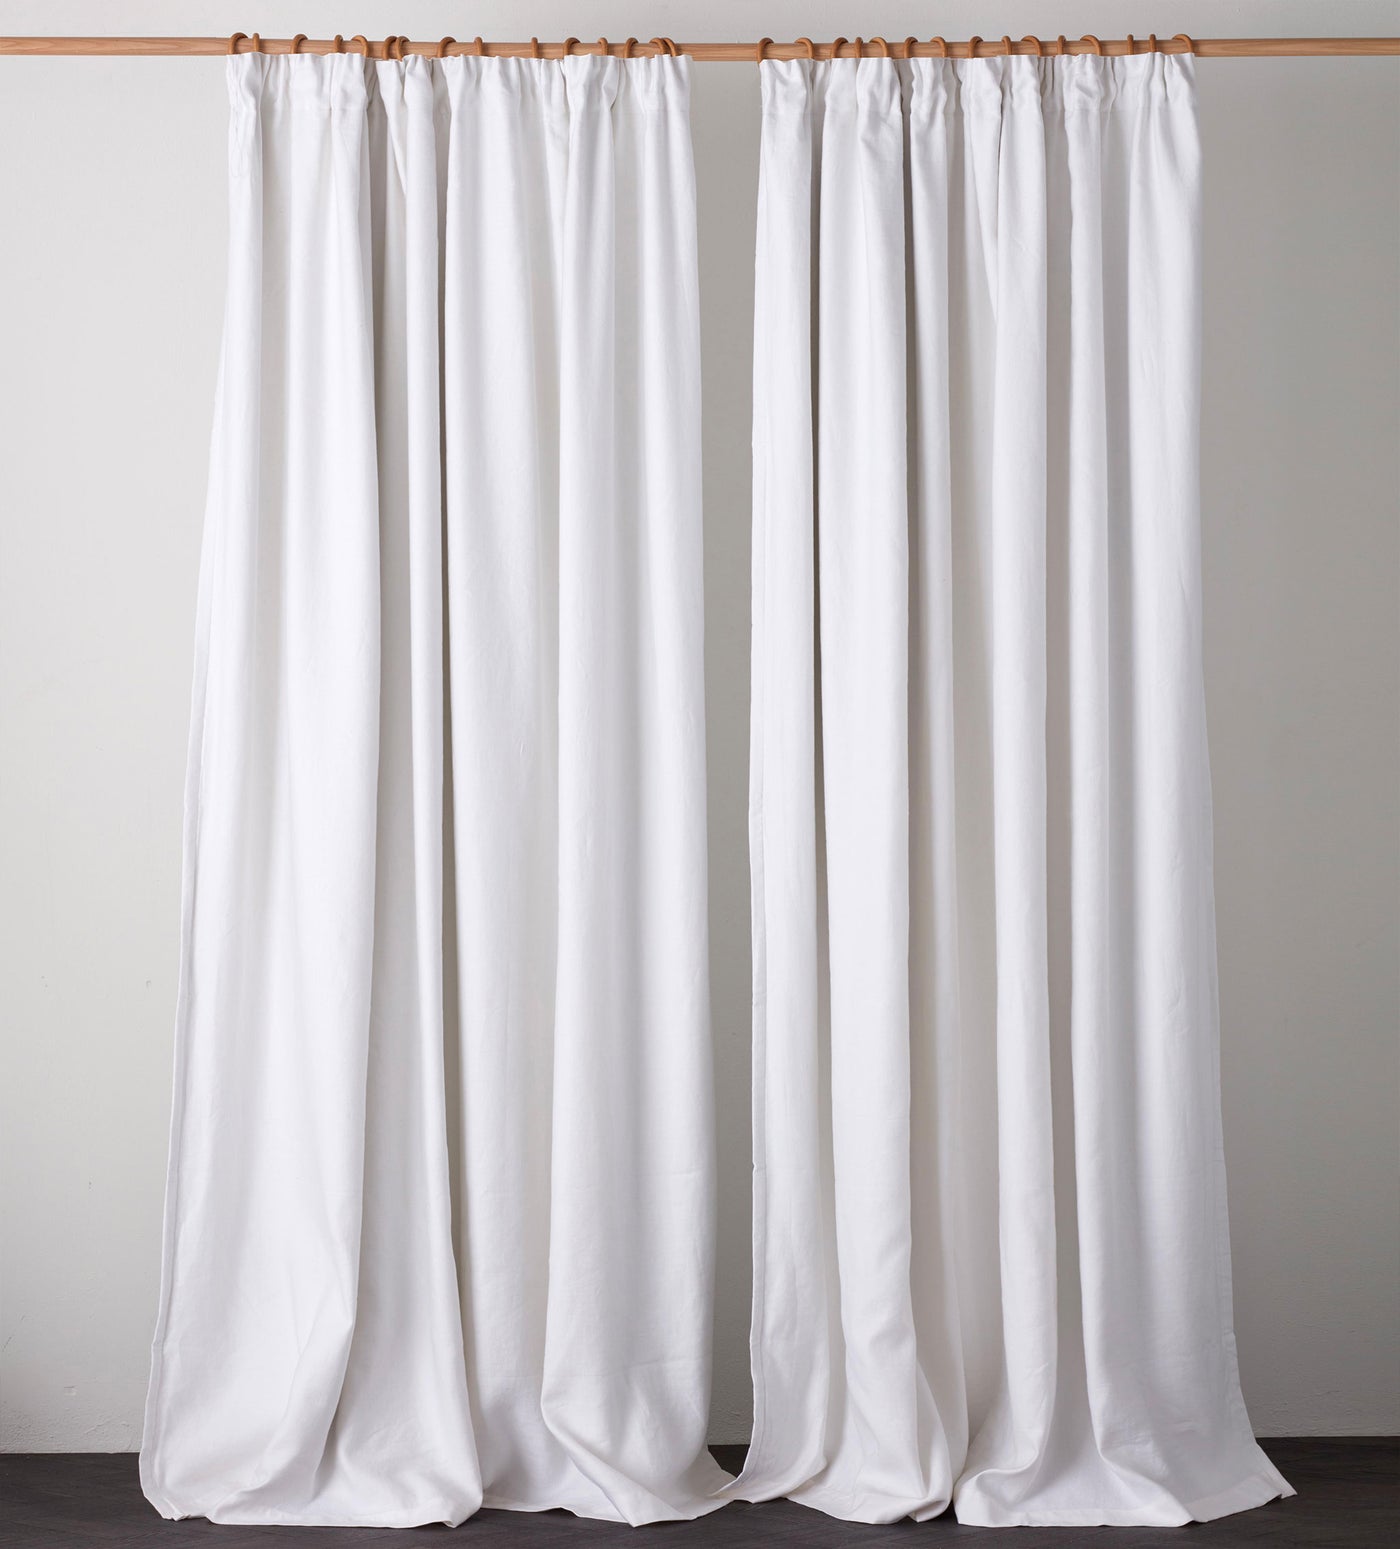 Off White Twill Cotton Linen Blackout Curtains (Pair)